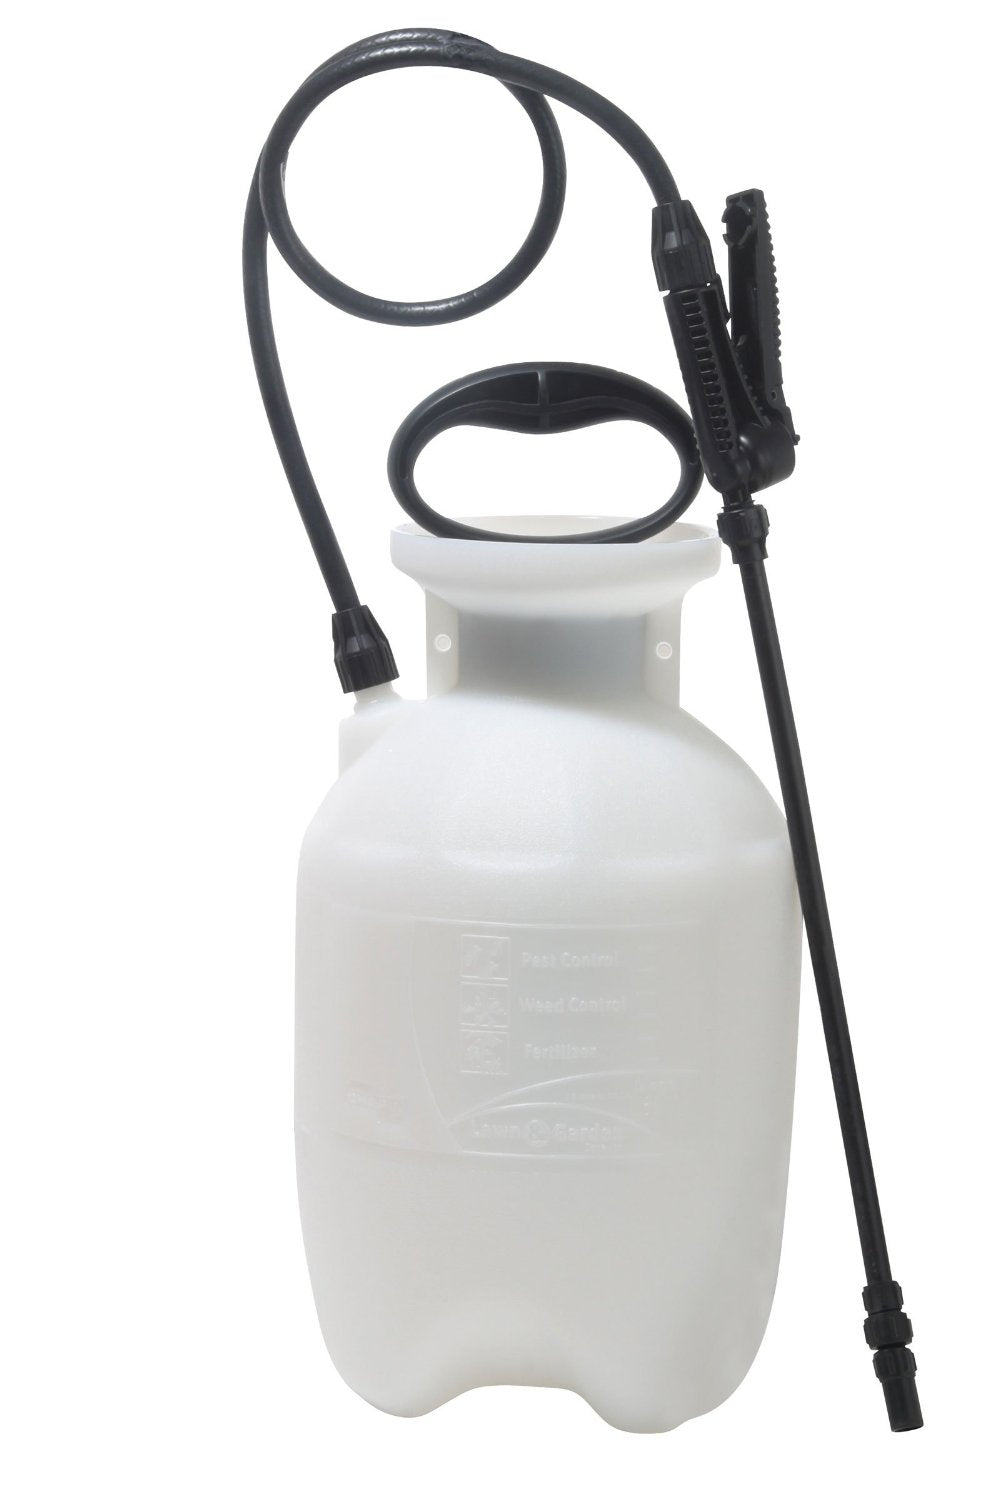 buy sprayers at cheap rate in bulk. wholesale & retail plant care supplies store.